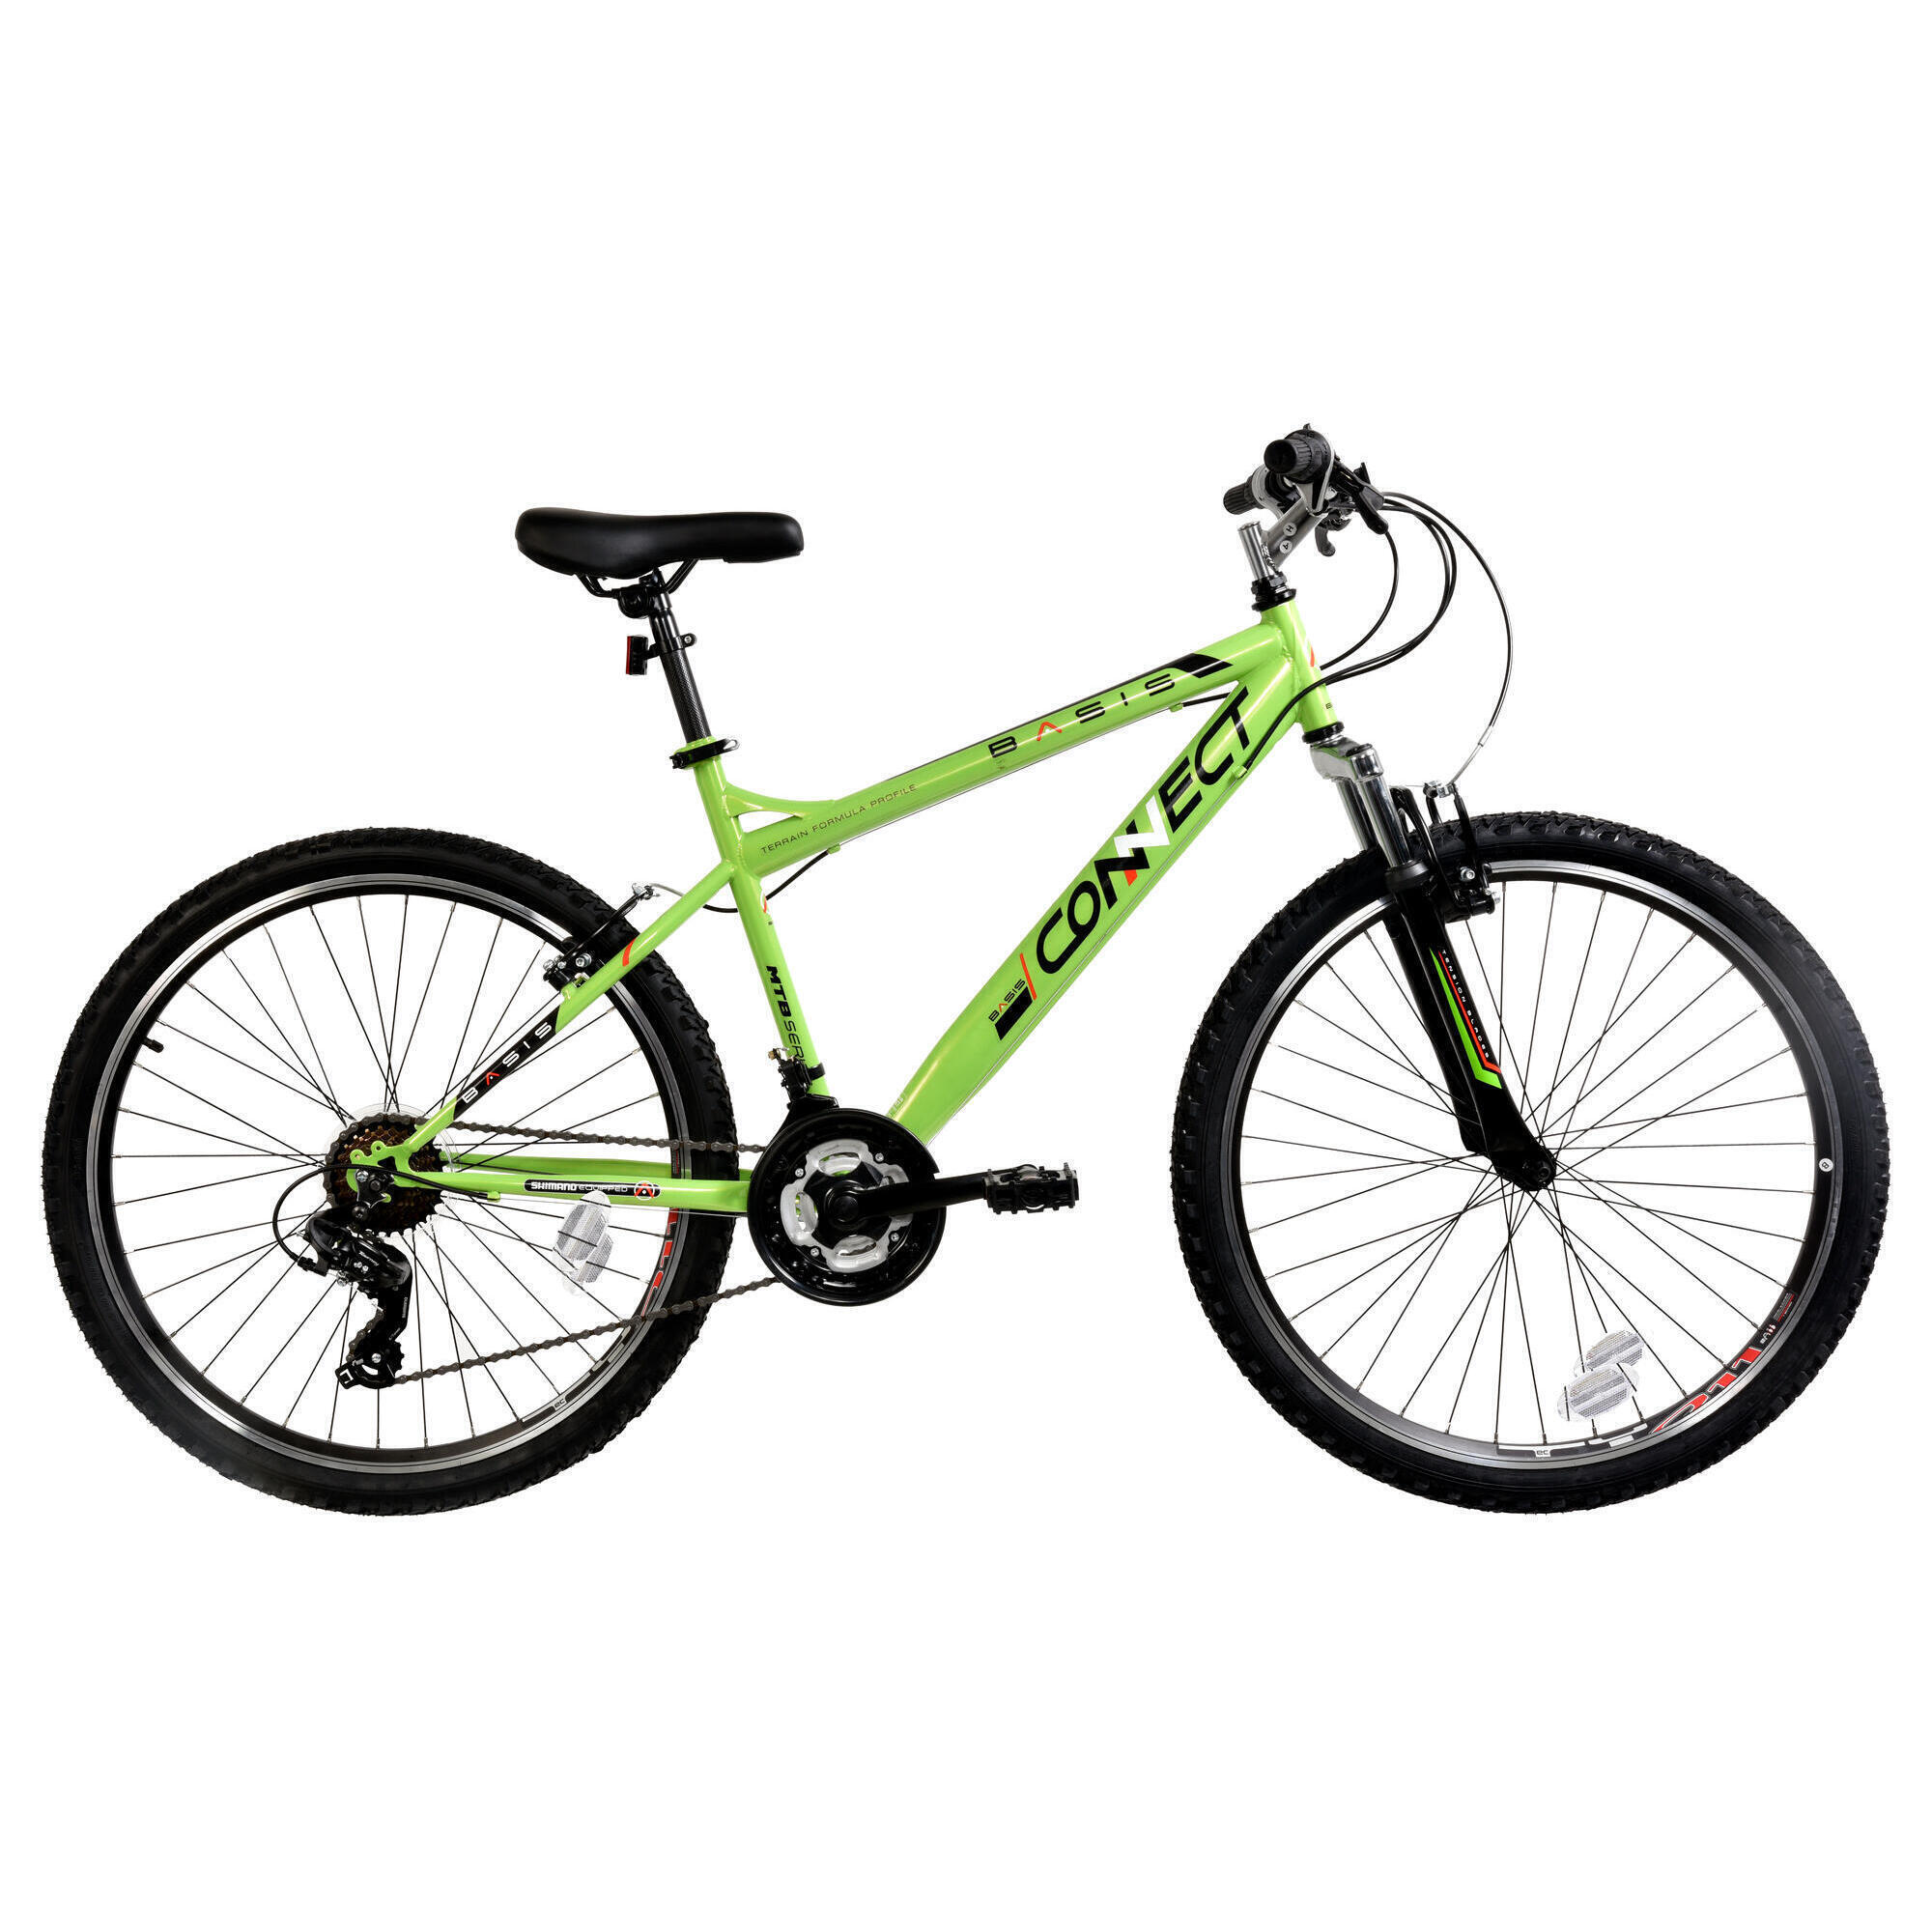 Basis Connect Adult's Hardtail Mountain Bike, 26In Wheel - Green/Black 1/5